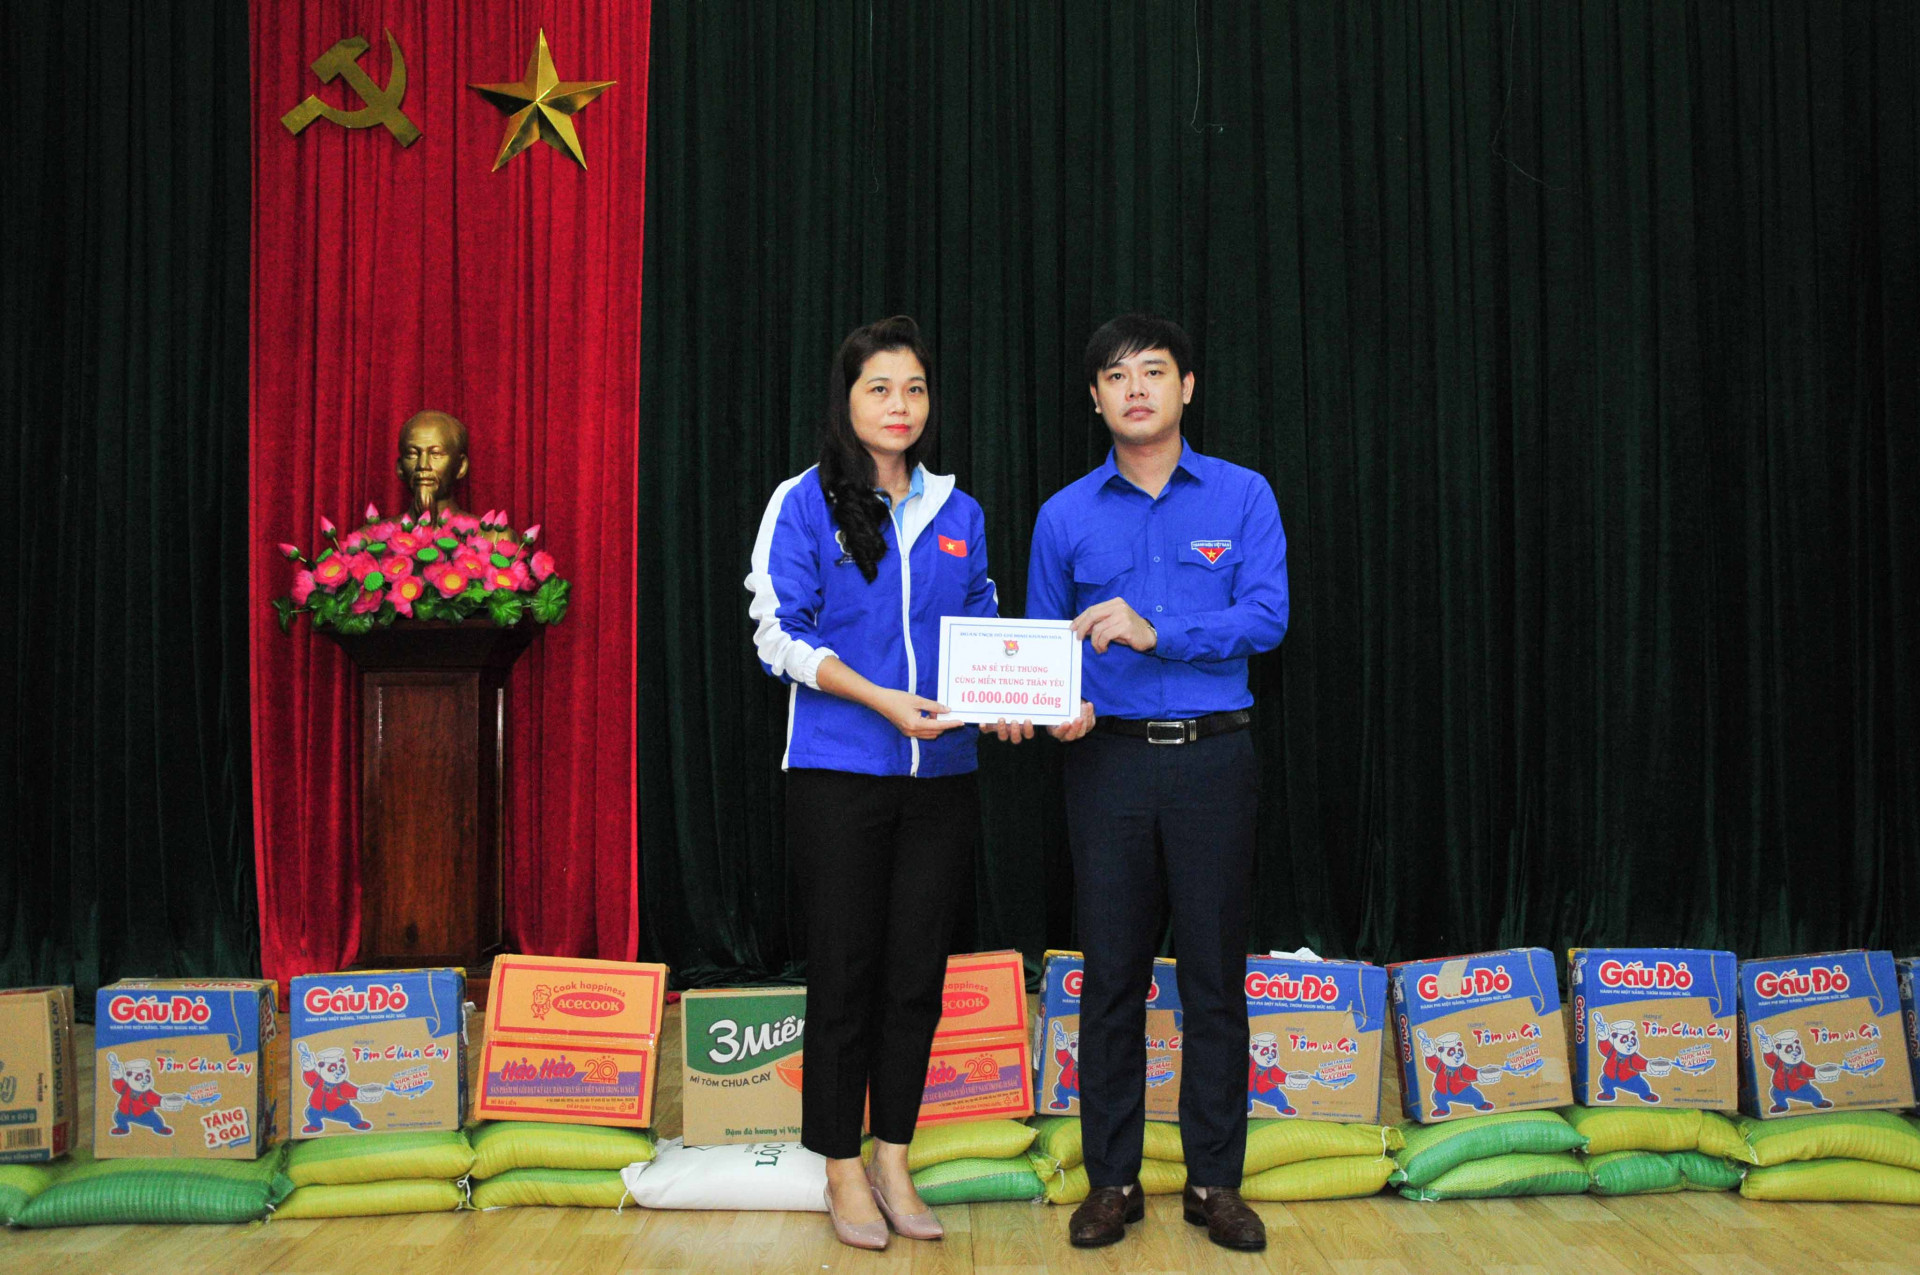 Khanh Hoa Youth Union handing VND10 million to Quang Nam Youth Union as a financial support to the family of Ho Van Do (deputy secretary of Phuoc Loc Commune Youth Union (Phuoc Son District, Quang Nam Province) who died on duty while helping people 